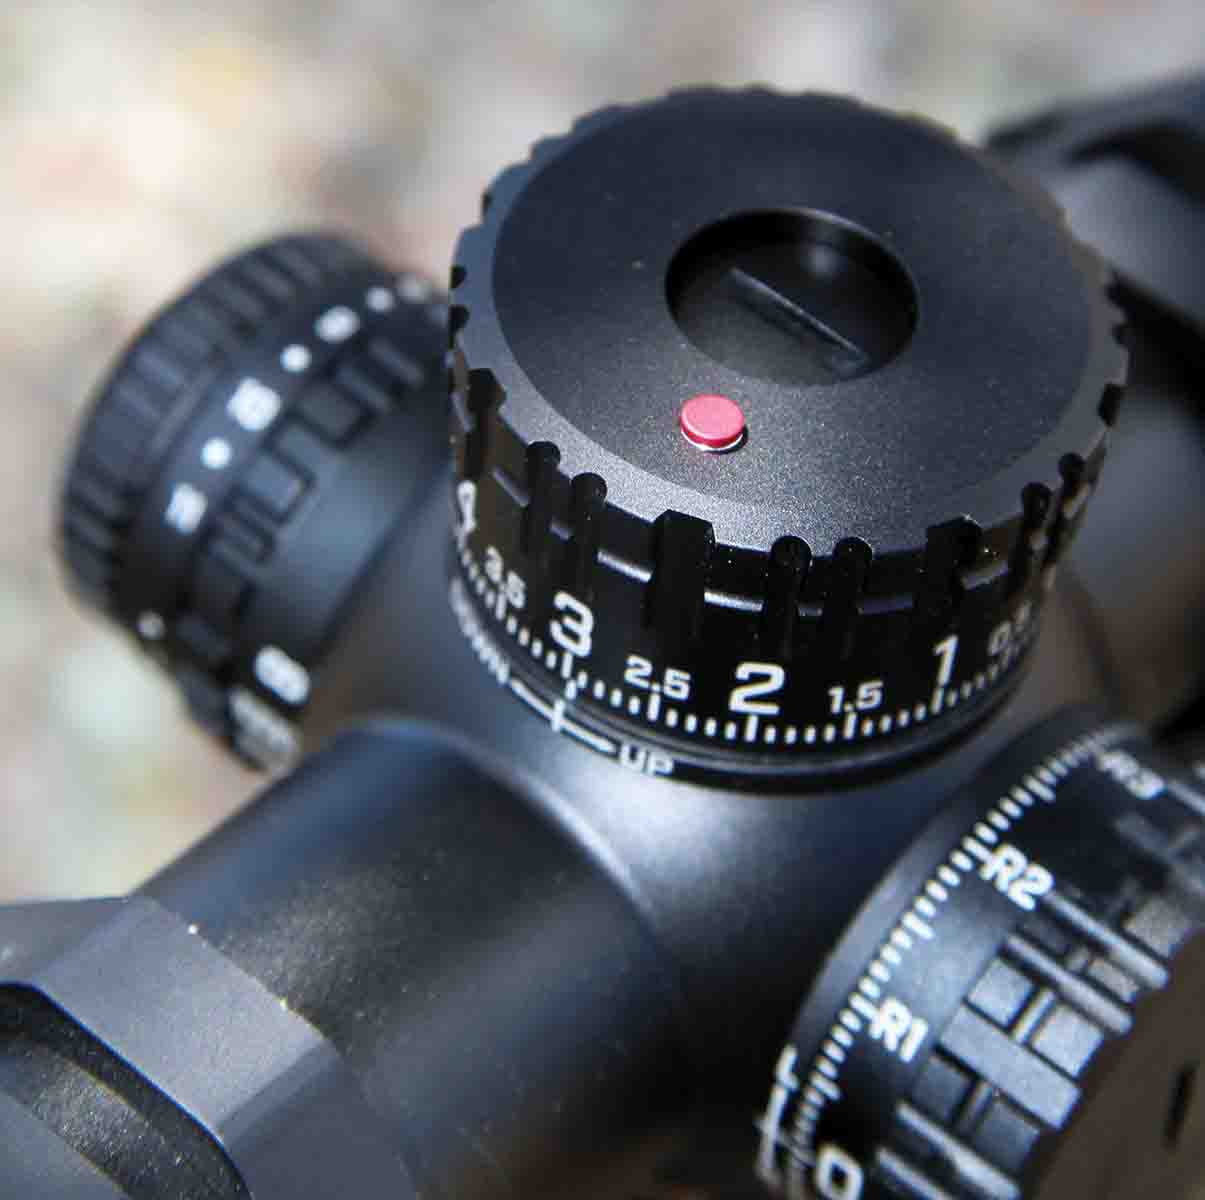 The Bushnell Match Pro HD includes a new REV-Indicator, which pops-up after the elevation turret is turned up a complete revolution, acting as a clear marker following longer shots.